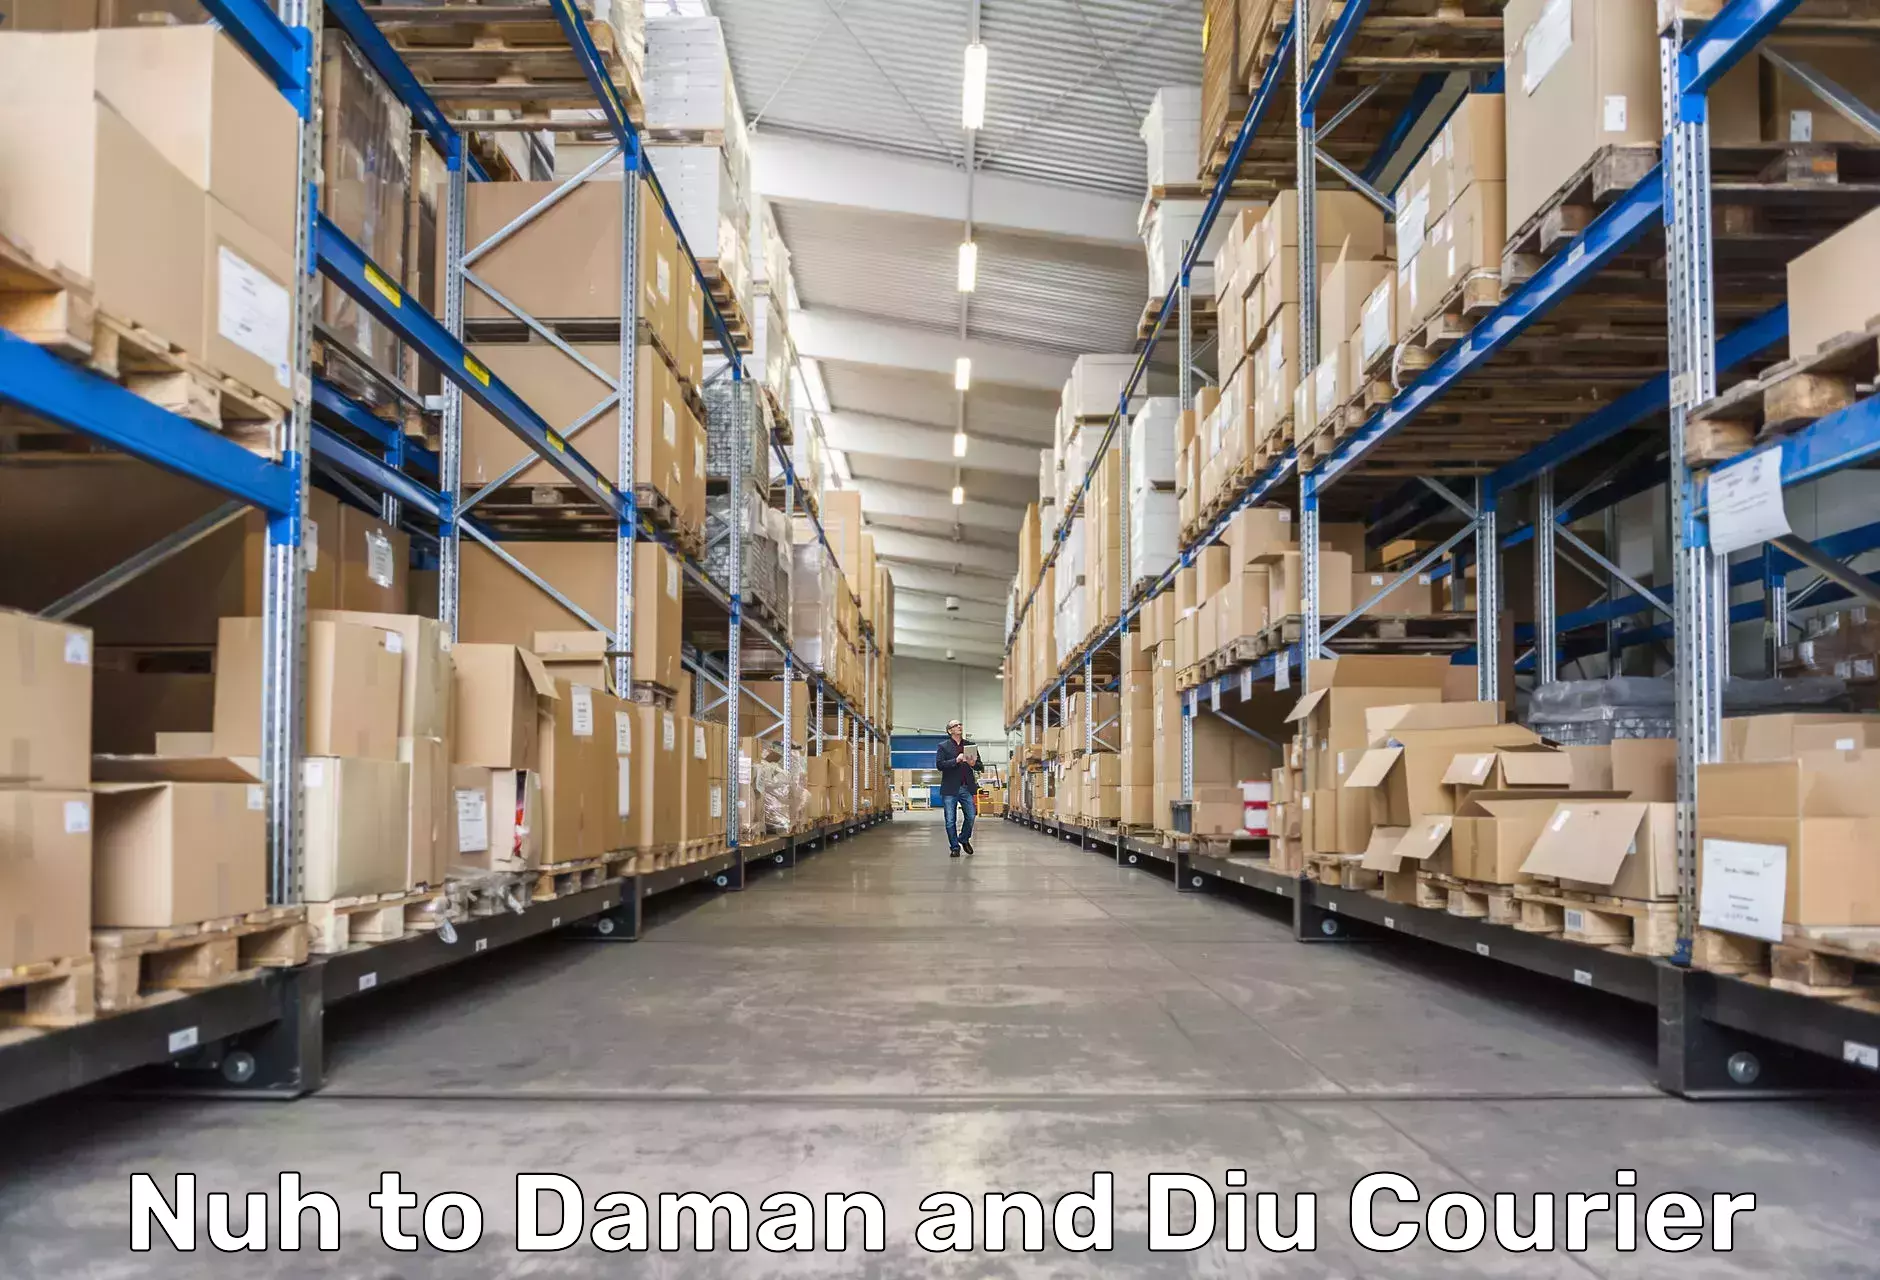 International courier networks Nuh to Daman and Diu